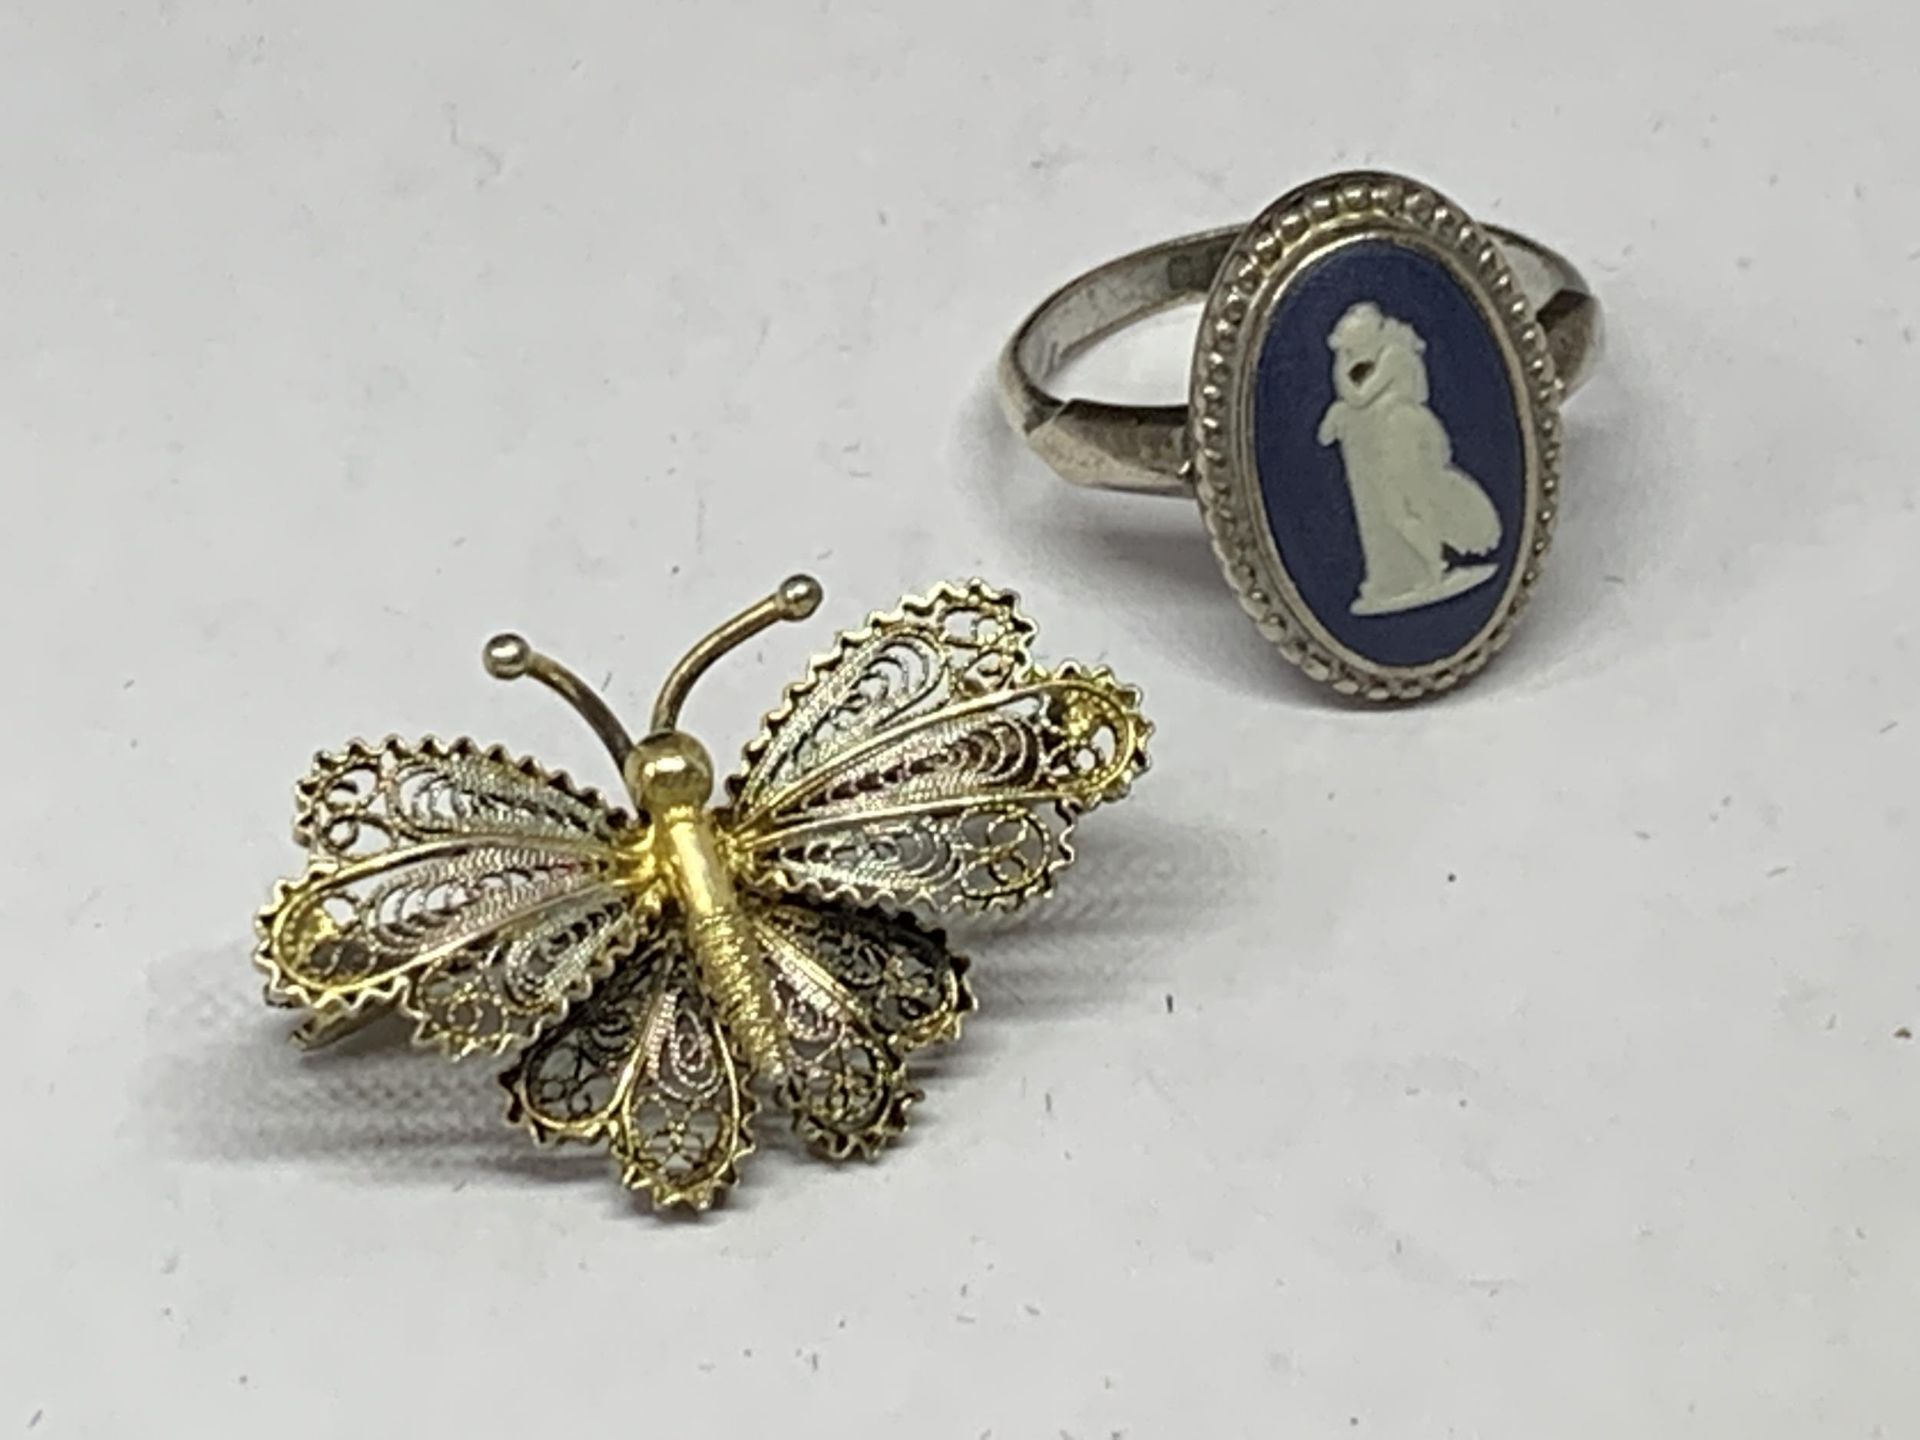 A SILVER BLUE WEDGWOOD JASPERWARE RING SIZE Q/R AND A SILVER BUTTERFLY BROOCH